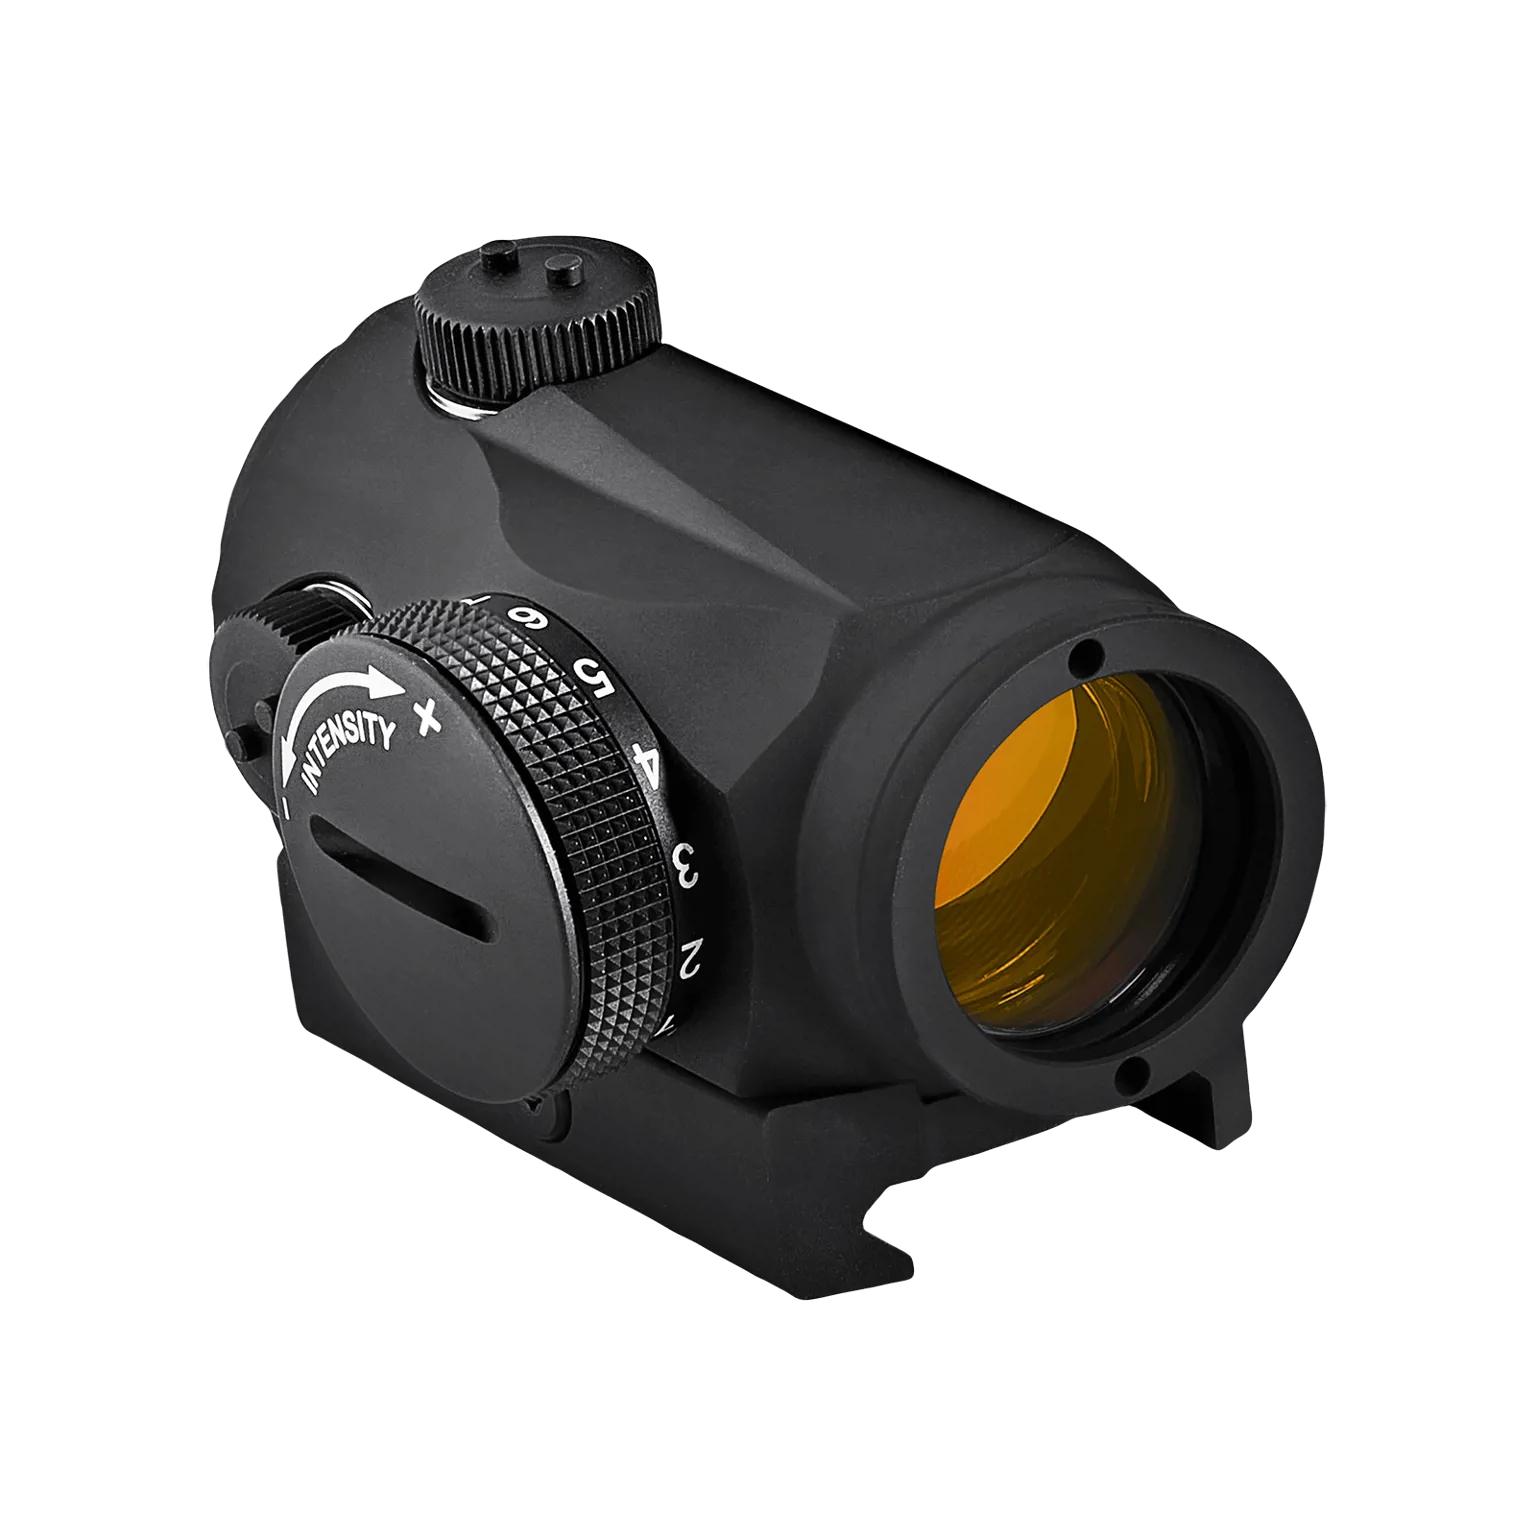 Micro T-1™ 2 MOA - Red dot reflex sight with standard mount for Weaver/Picatinny - 3